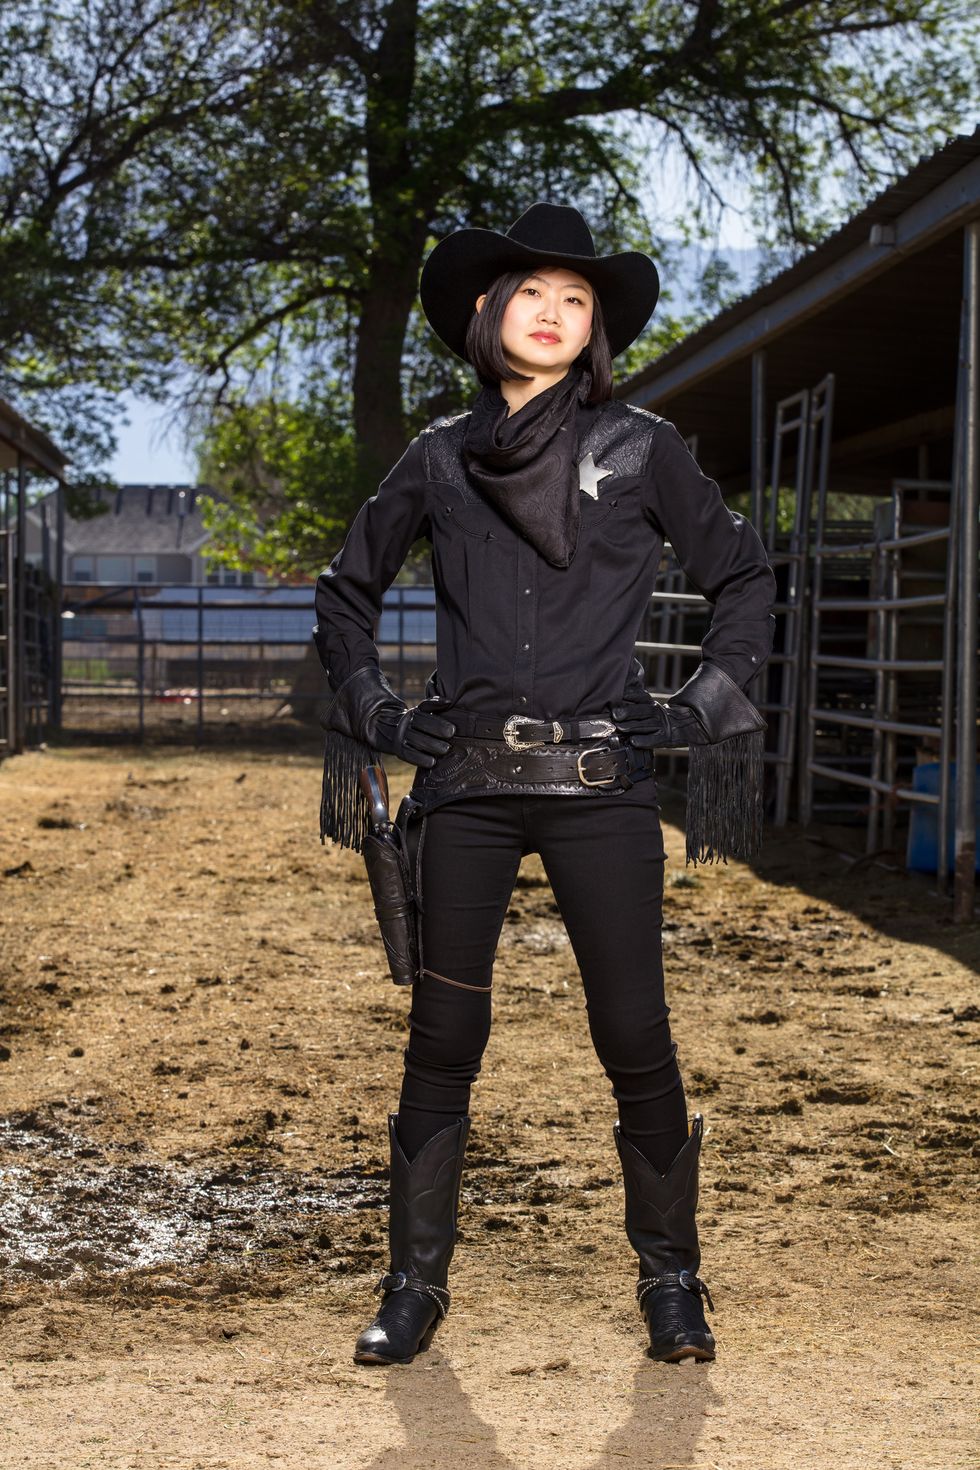 japanese woman in allblack cowgirl costume